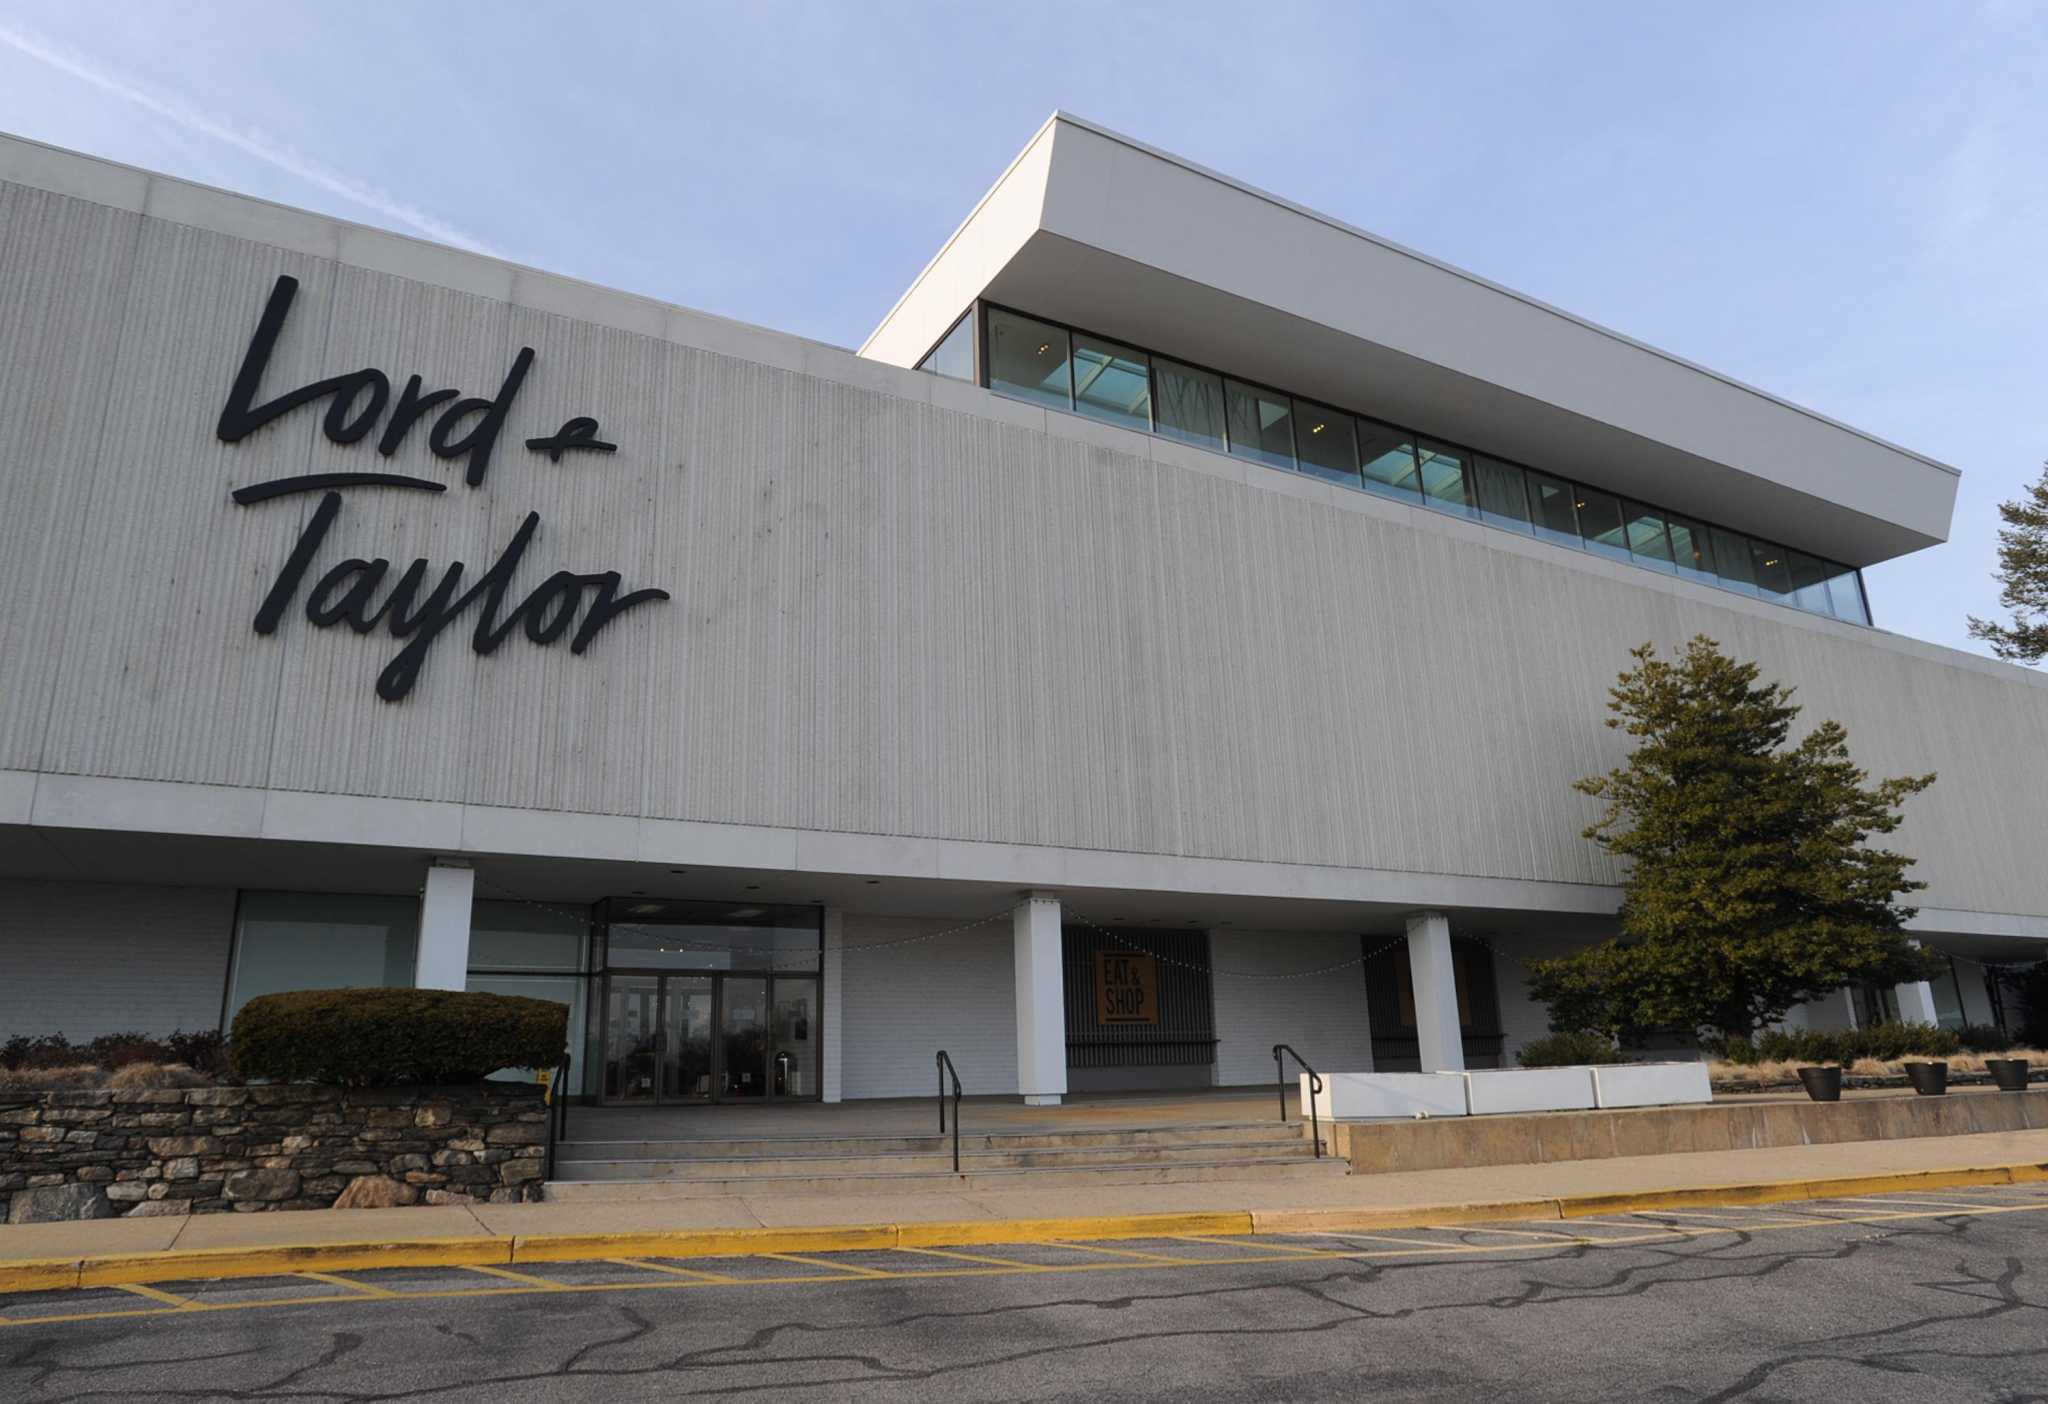 Lord & Taylor is closing all of its stores after 194 years in